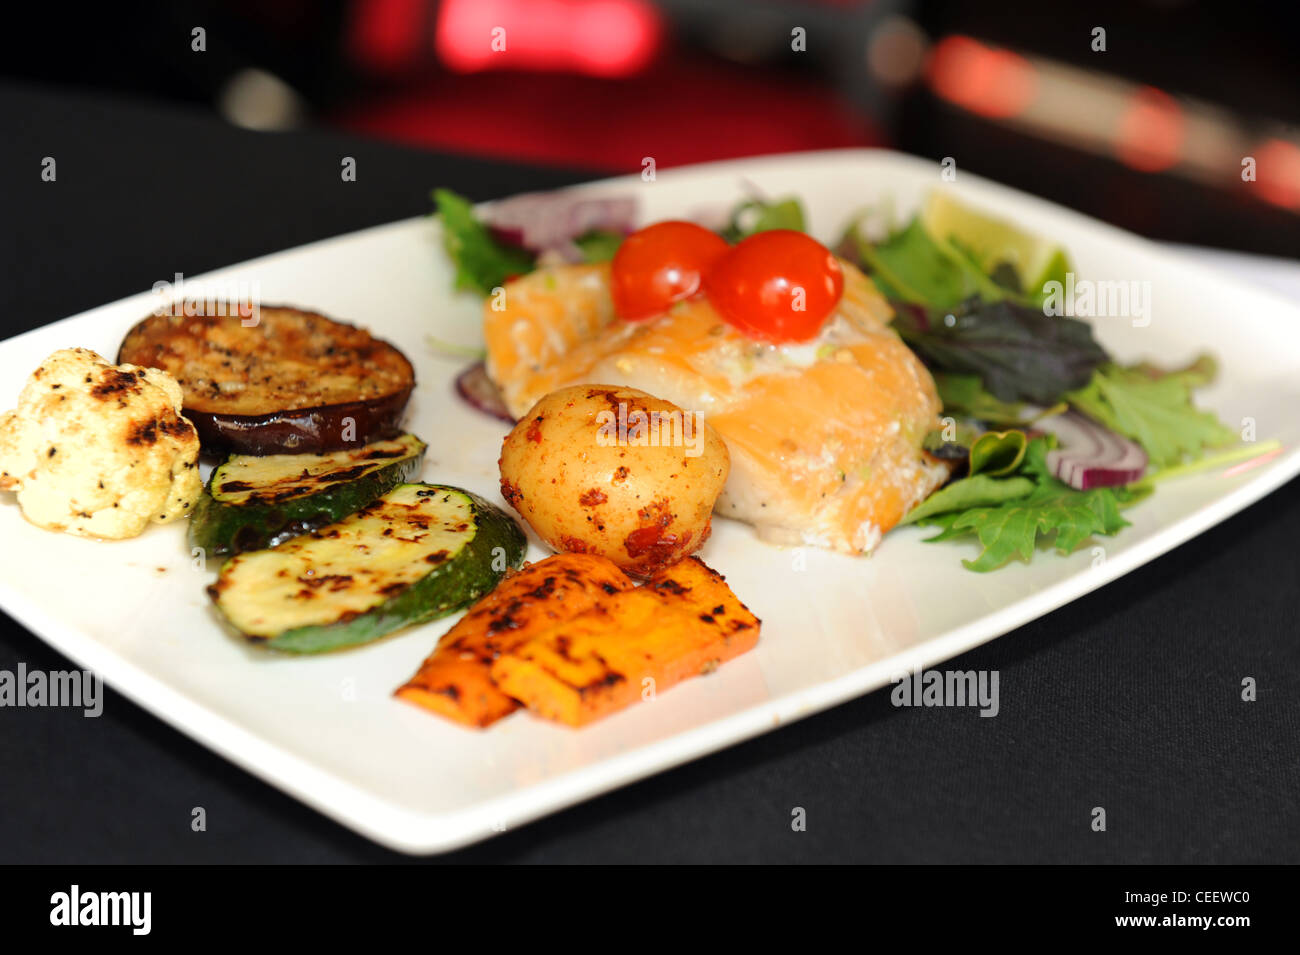 Grilled fish, vegetables and salad Stock Photo